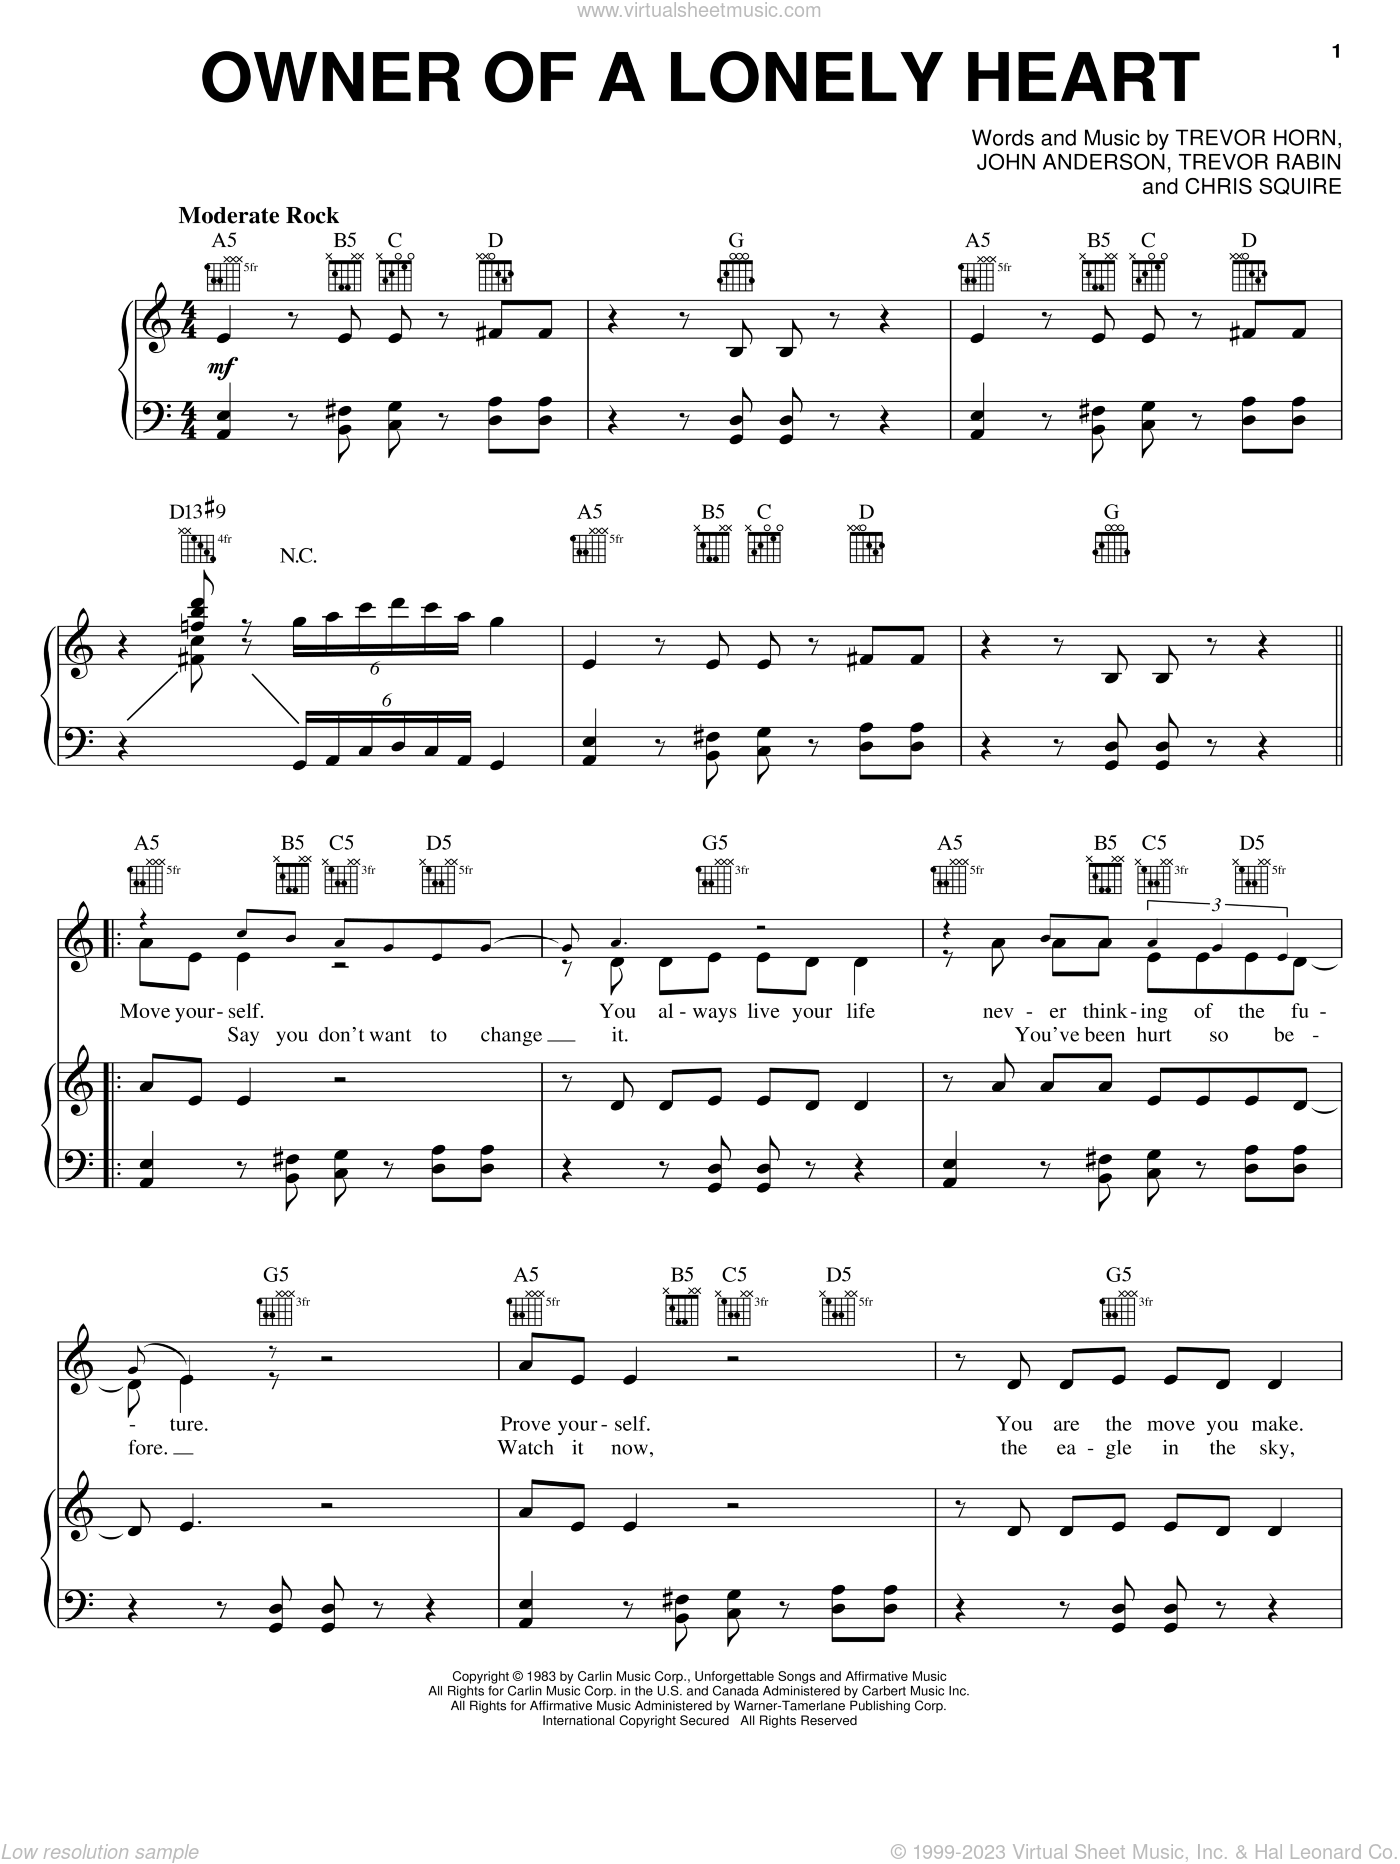 Owner Of A Lonely Heart sheet music for voice, piano or guitar